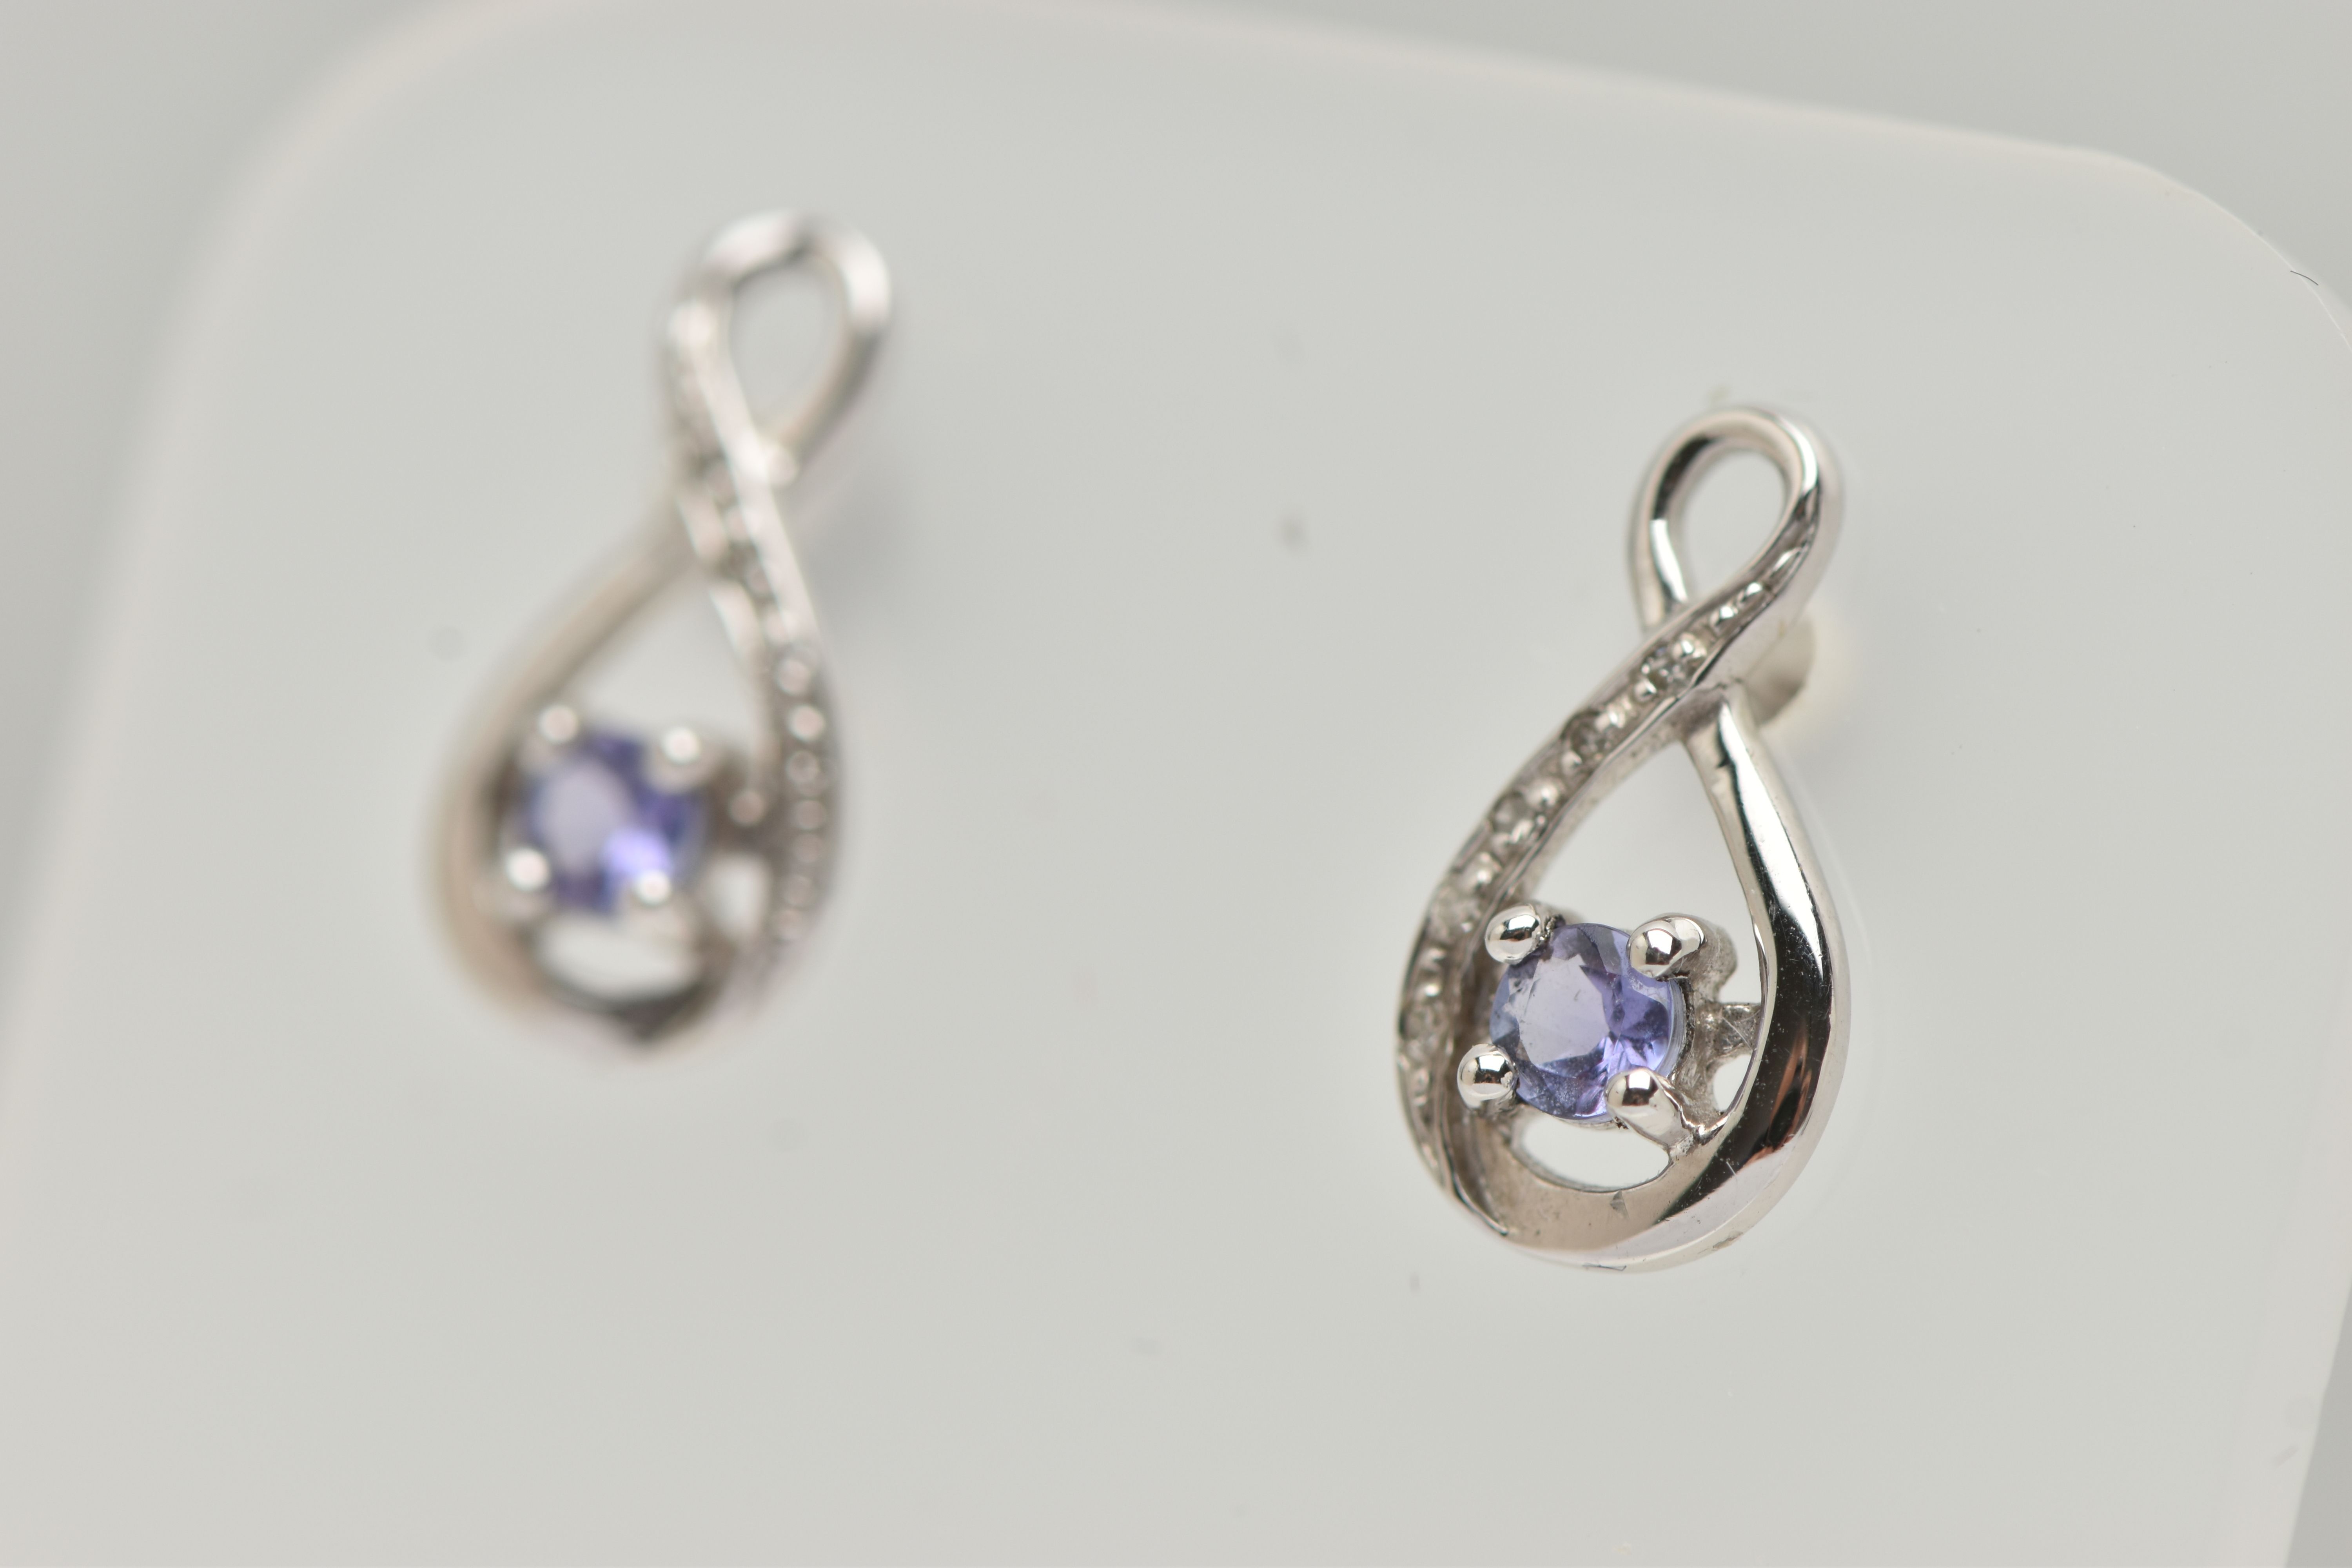 A BOXED PAIR OF 9CT WHITE GOLD TANZANITE AND DIAMOND SET EARRINGS, each earring set with a small - Image 3 of 3